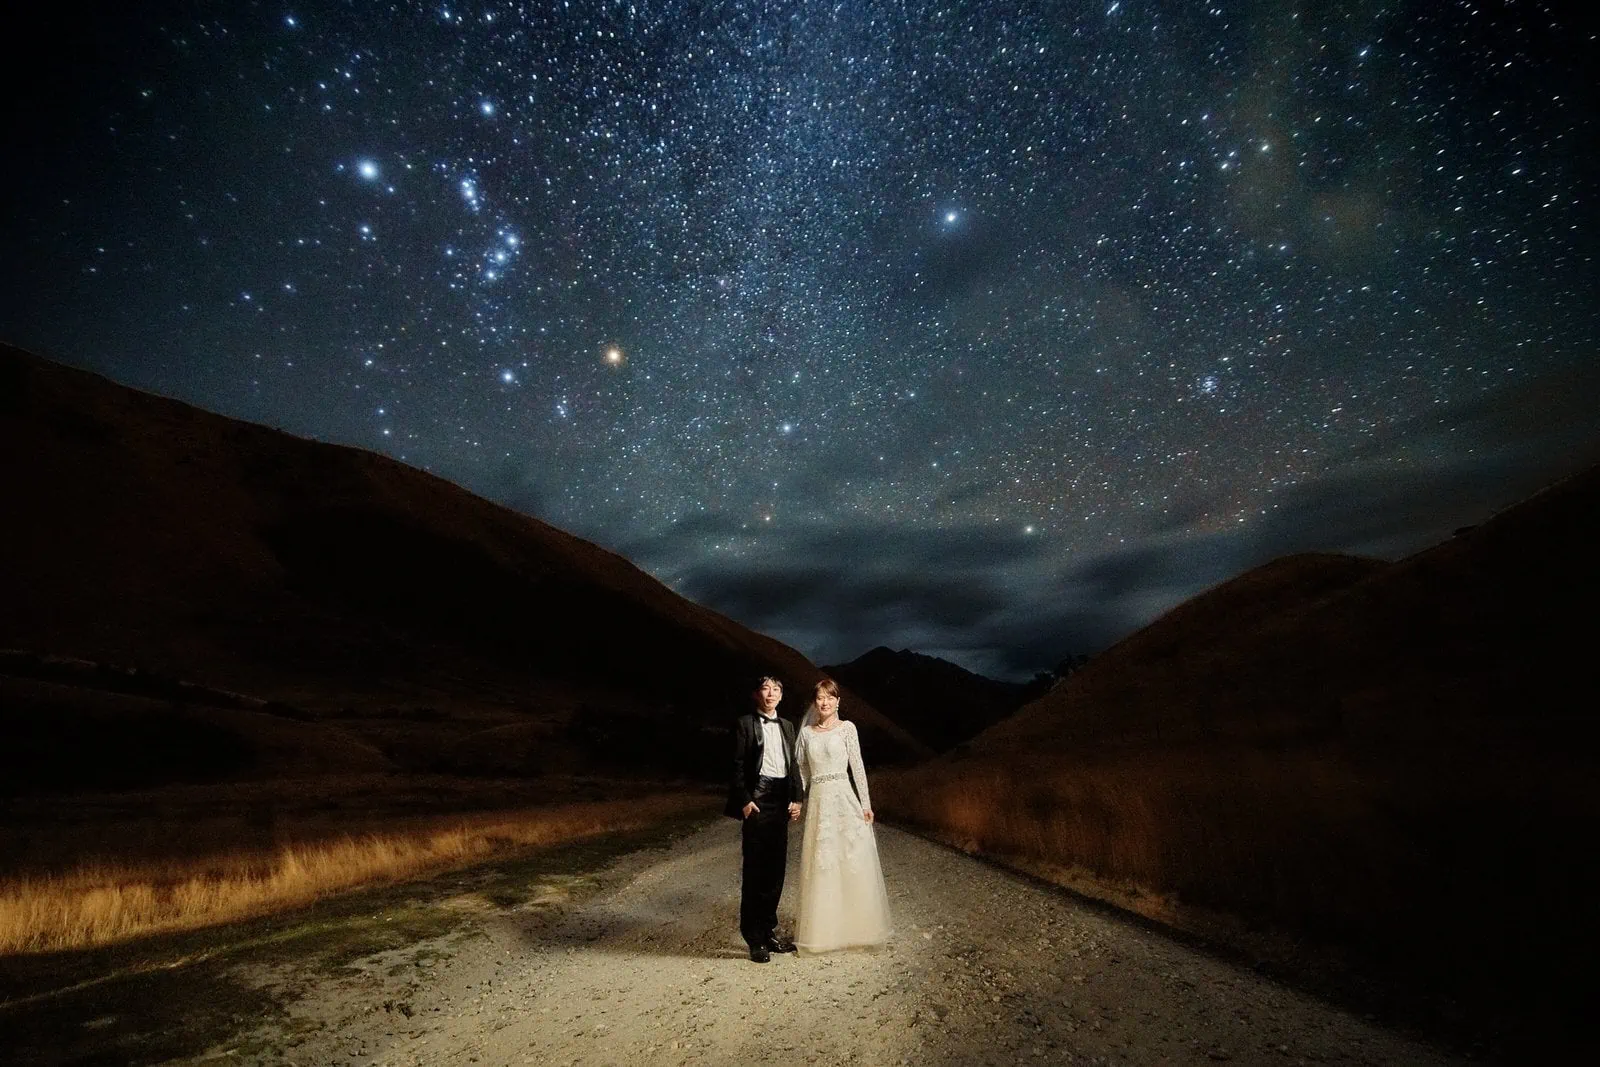 Queenstown New Zealand Elopement Wedding Photographer - A bride and groom standing under the stars on a dirt road during a starry night shoot.